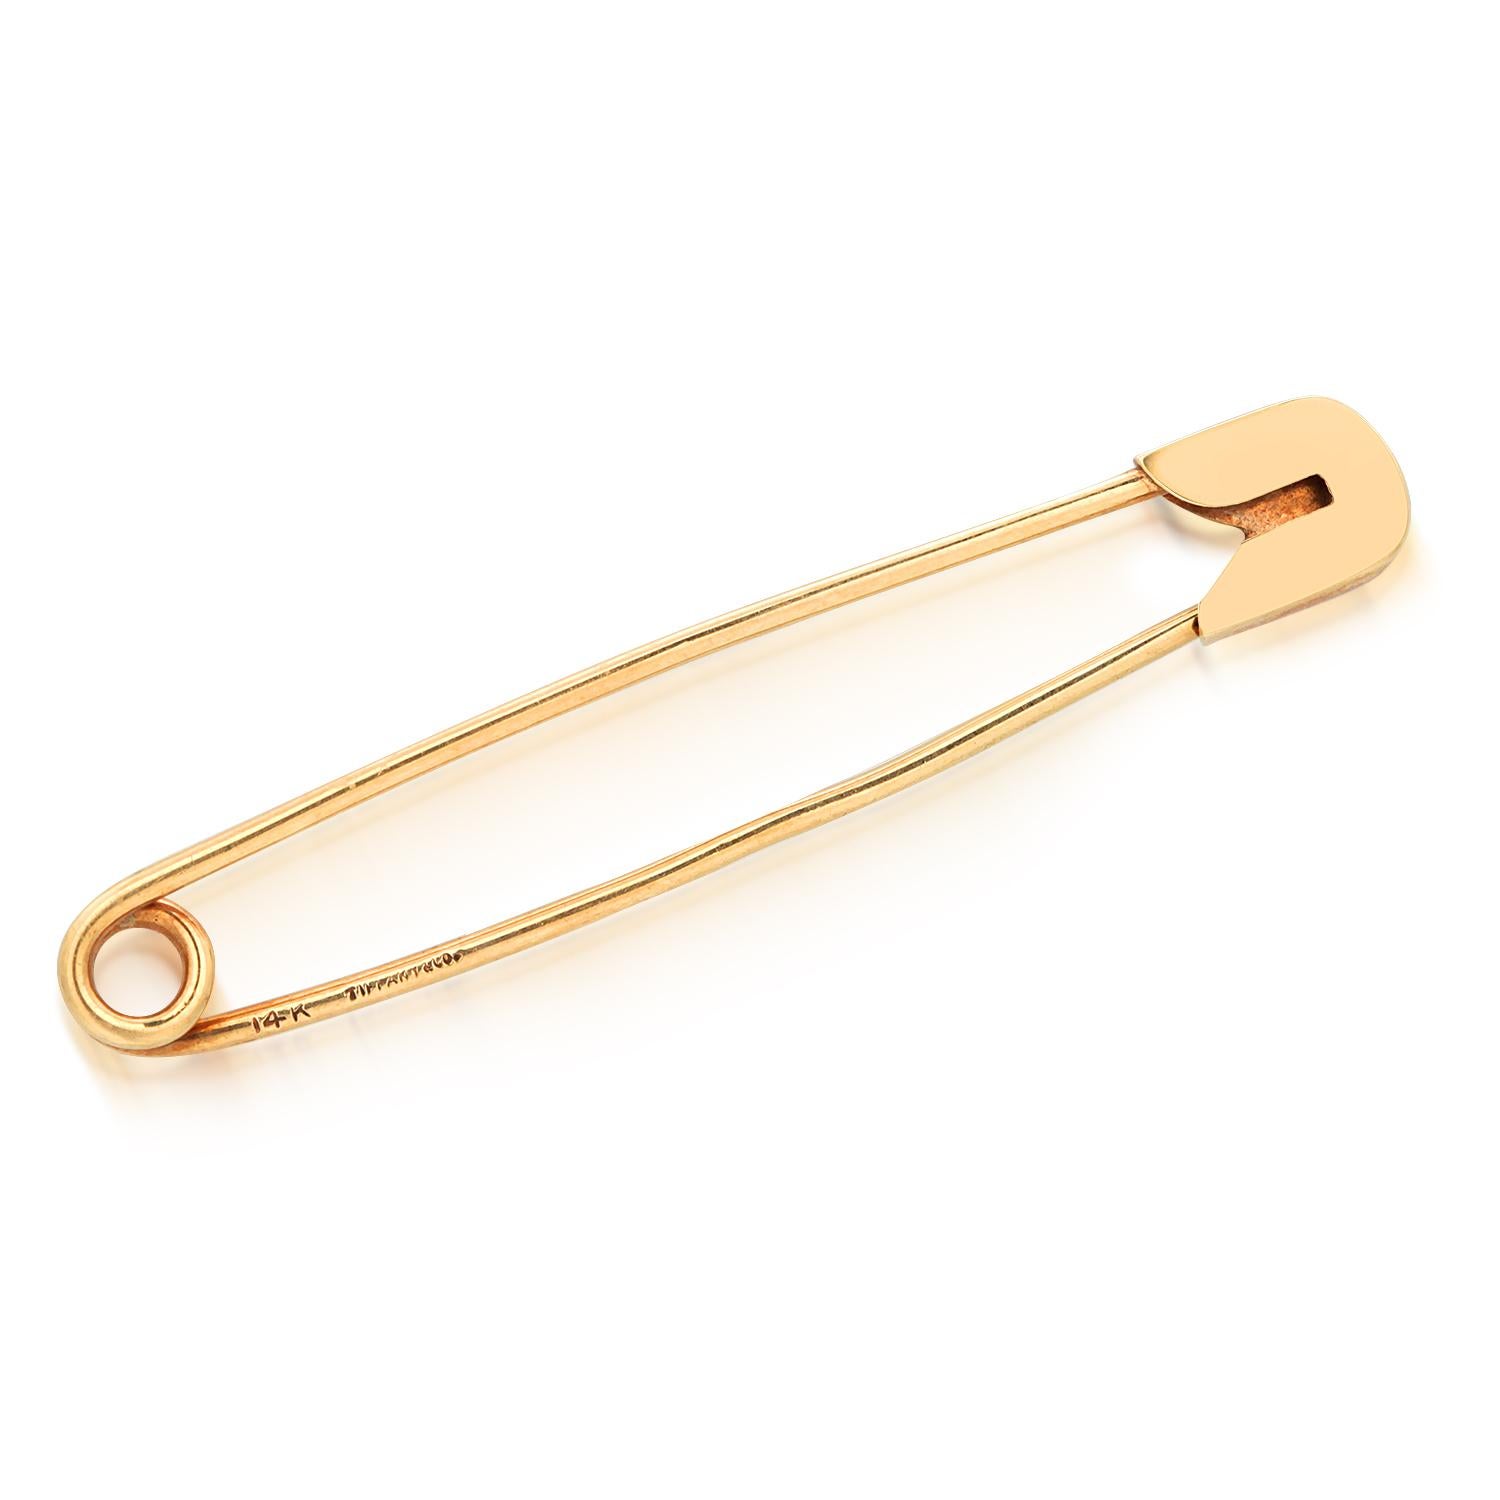 Vintage Tiffany Co. 14 Karat Yellow Gold 2.12 Inch Long Safety Pin For Sale 1